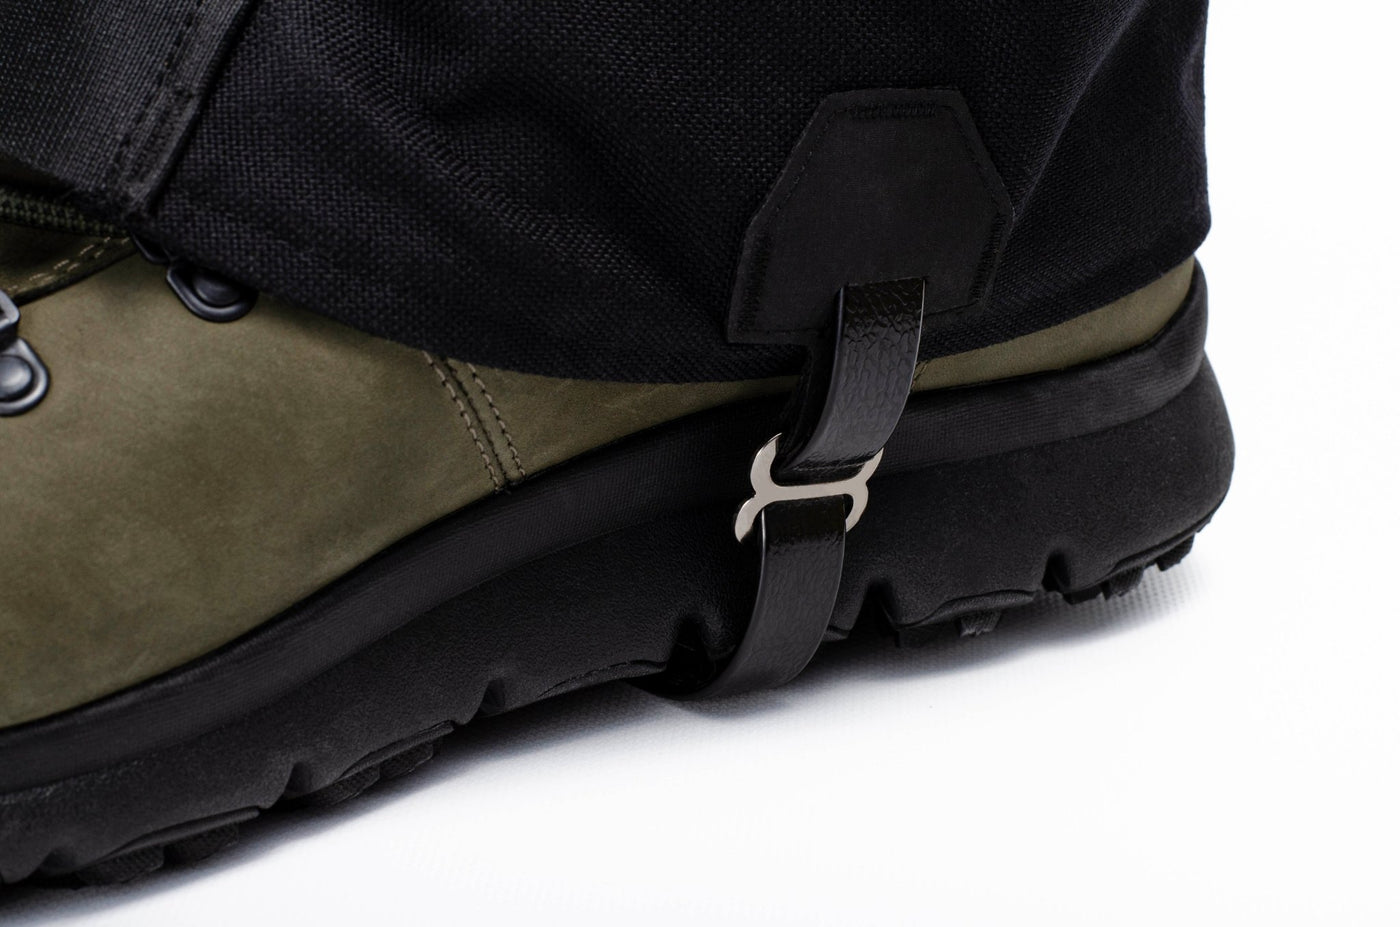 Armadillo LT™ Gaiter features an instep strap for additional security